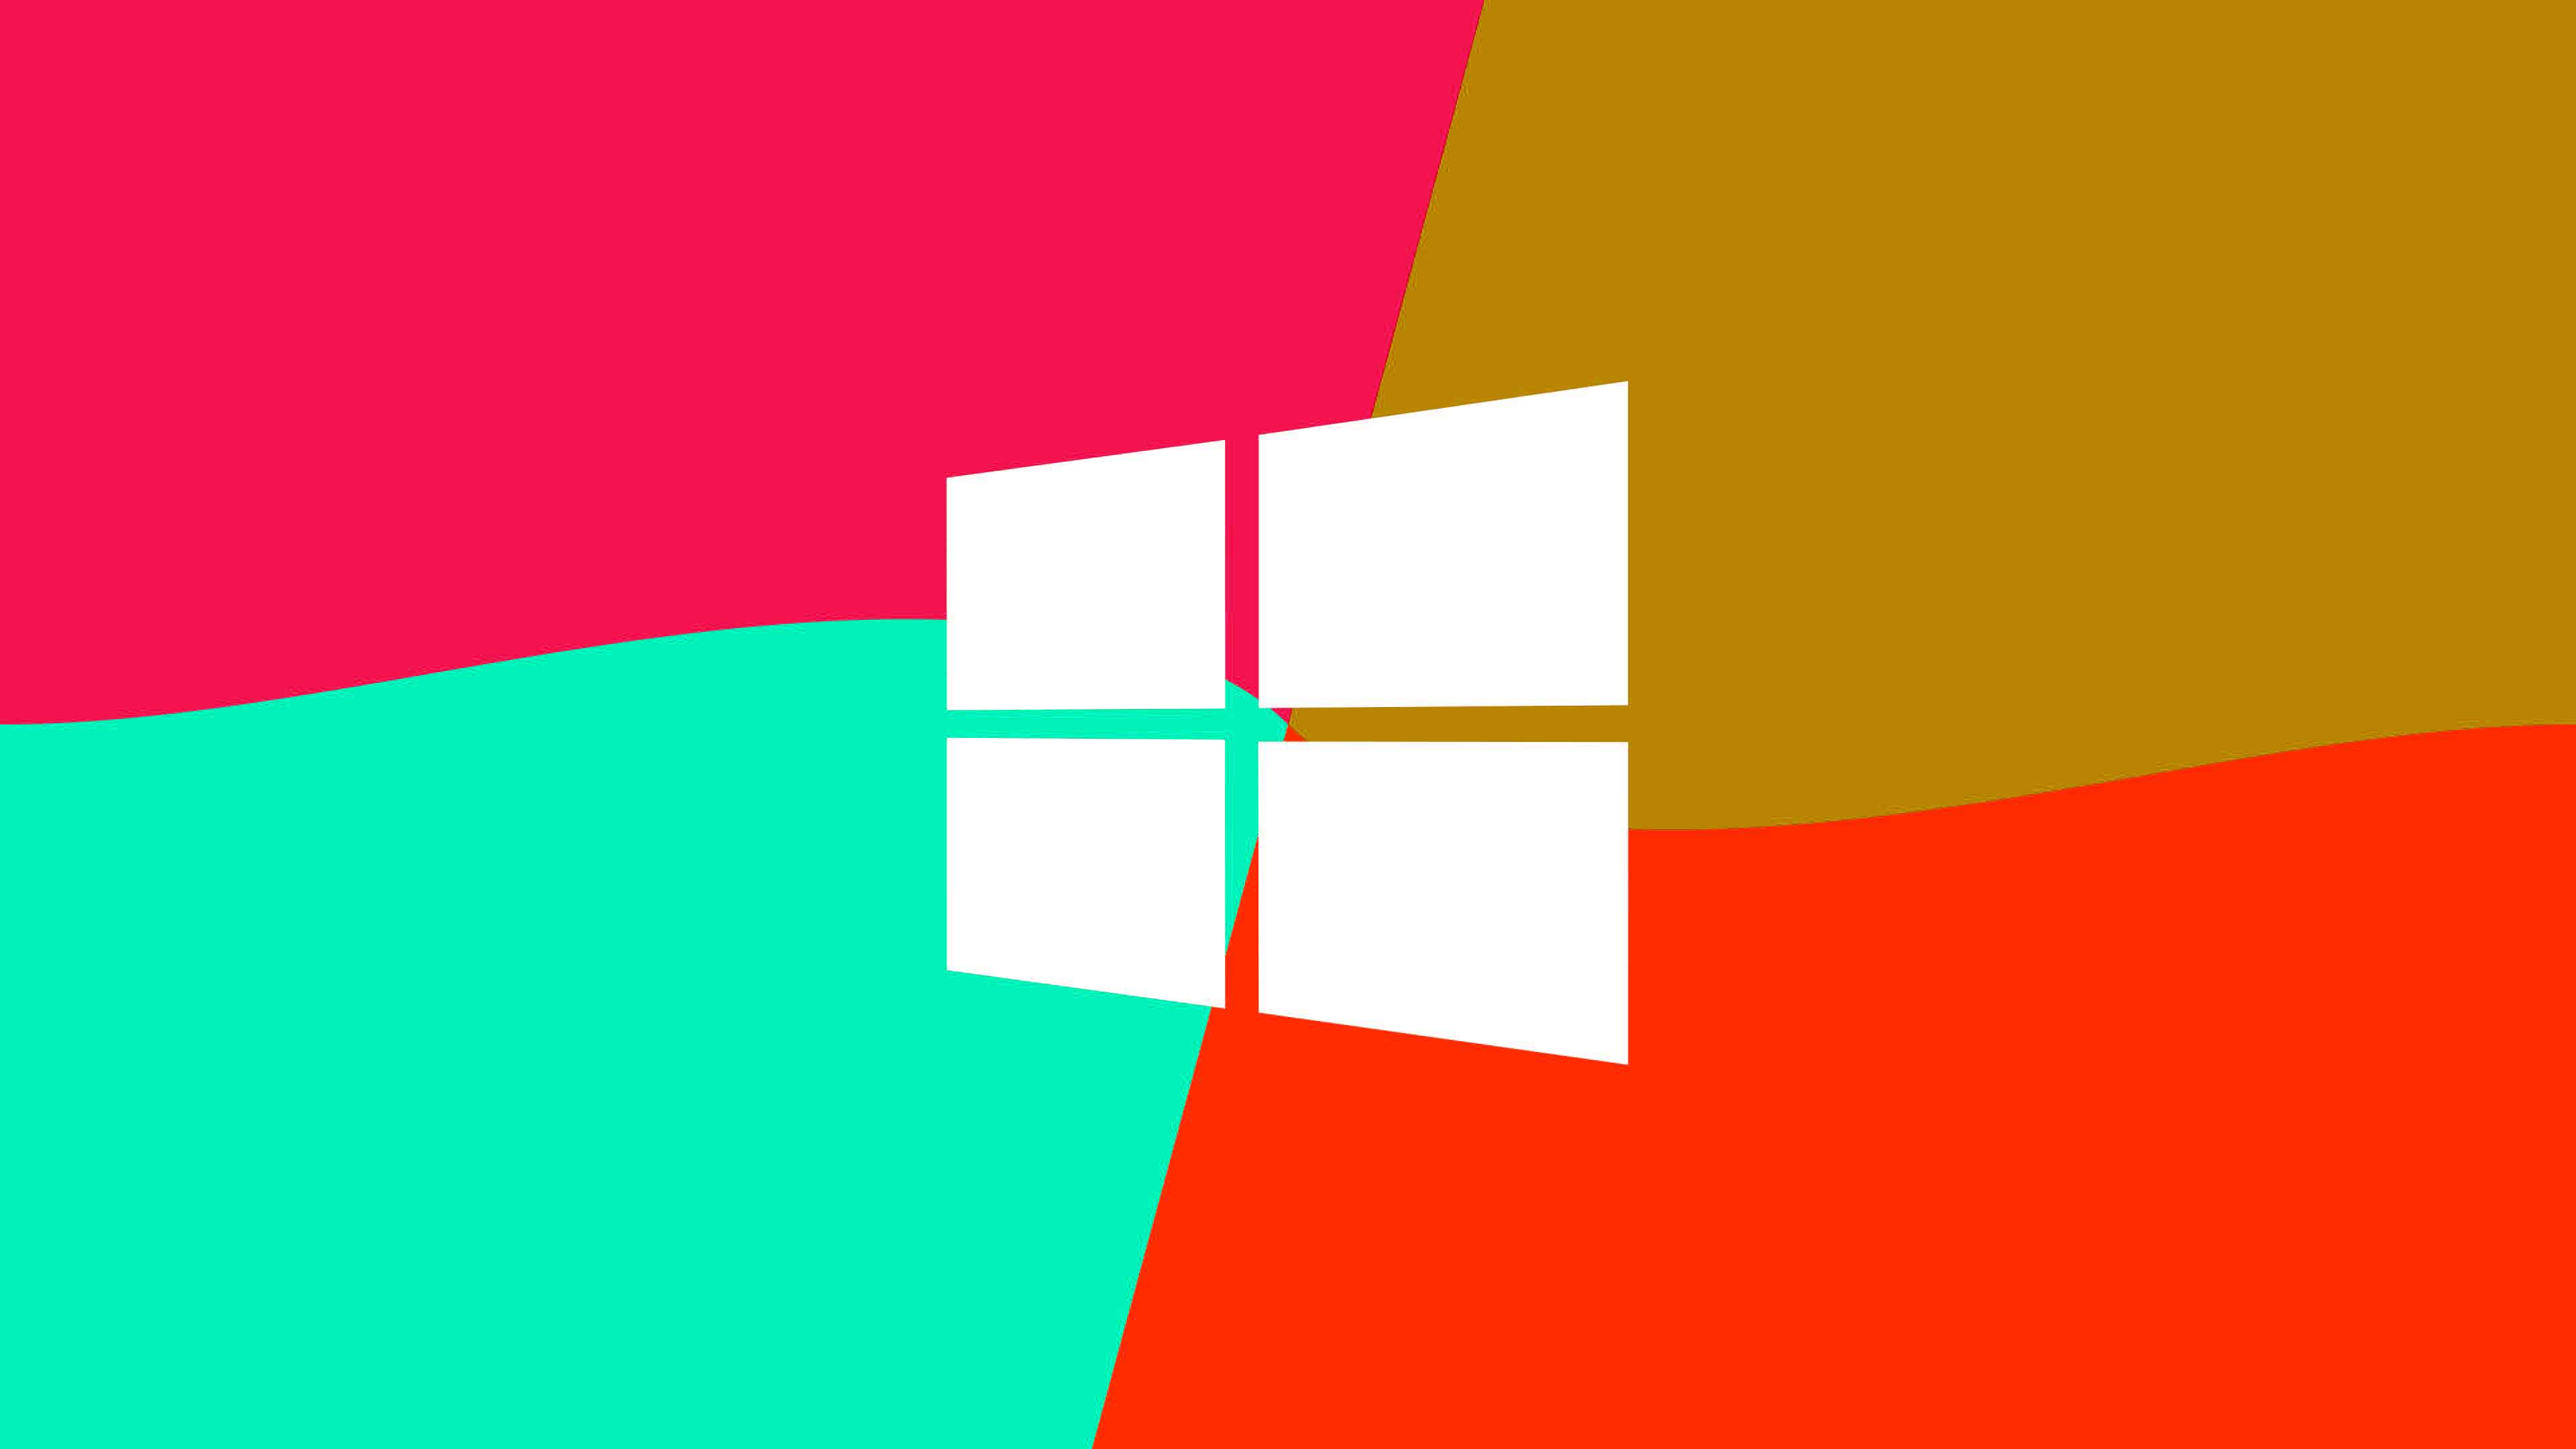 Windows 10 Colorful 4k Backgrounds - HD Wallpaper 